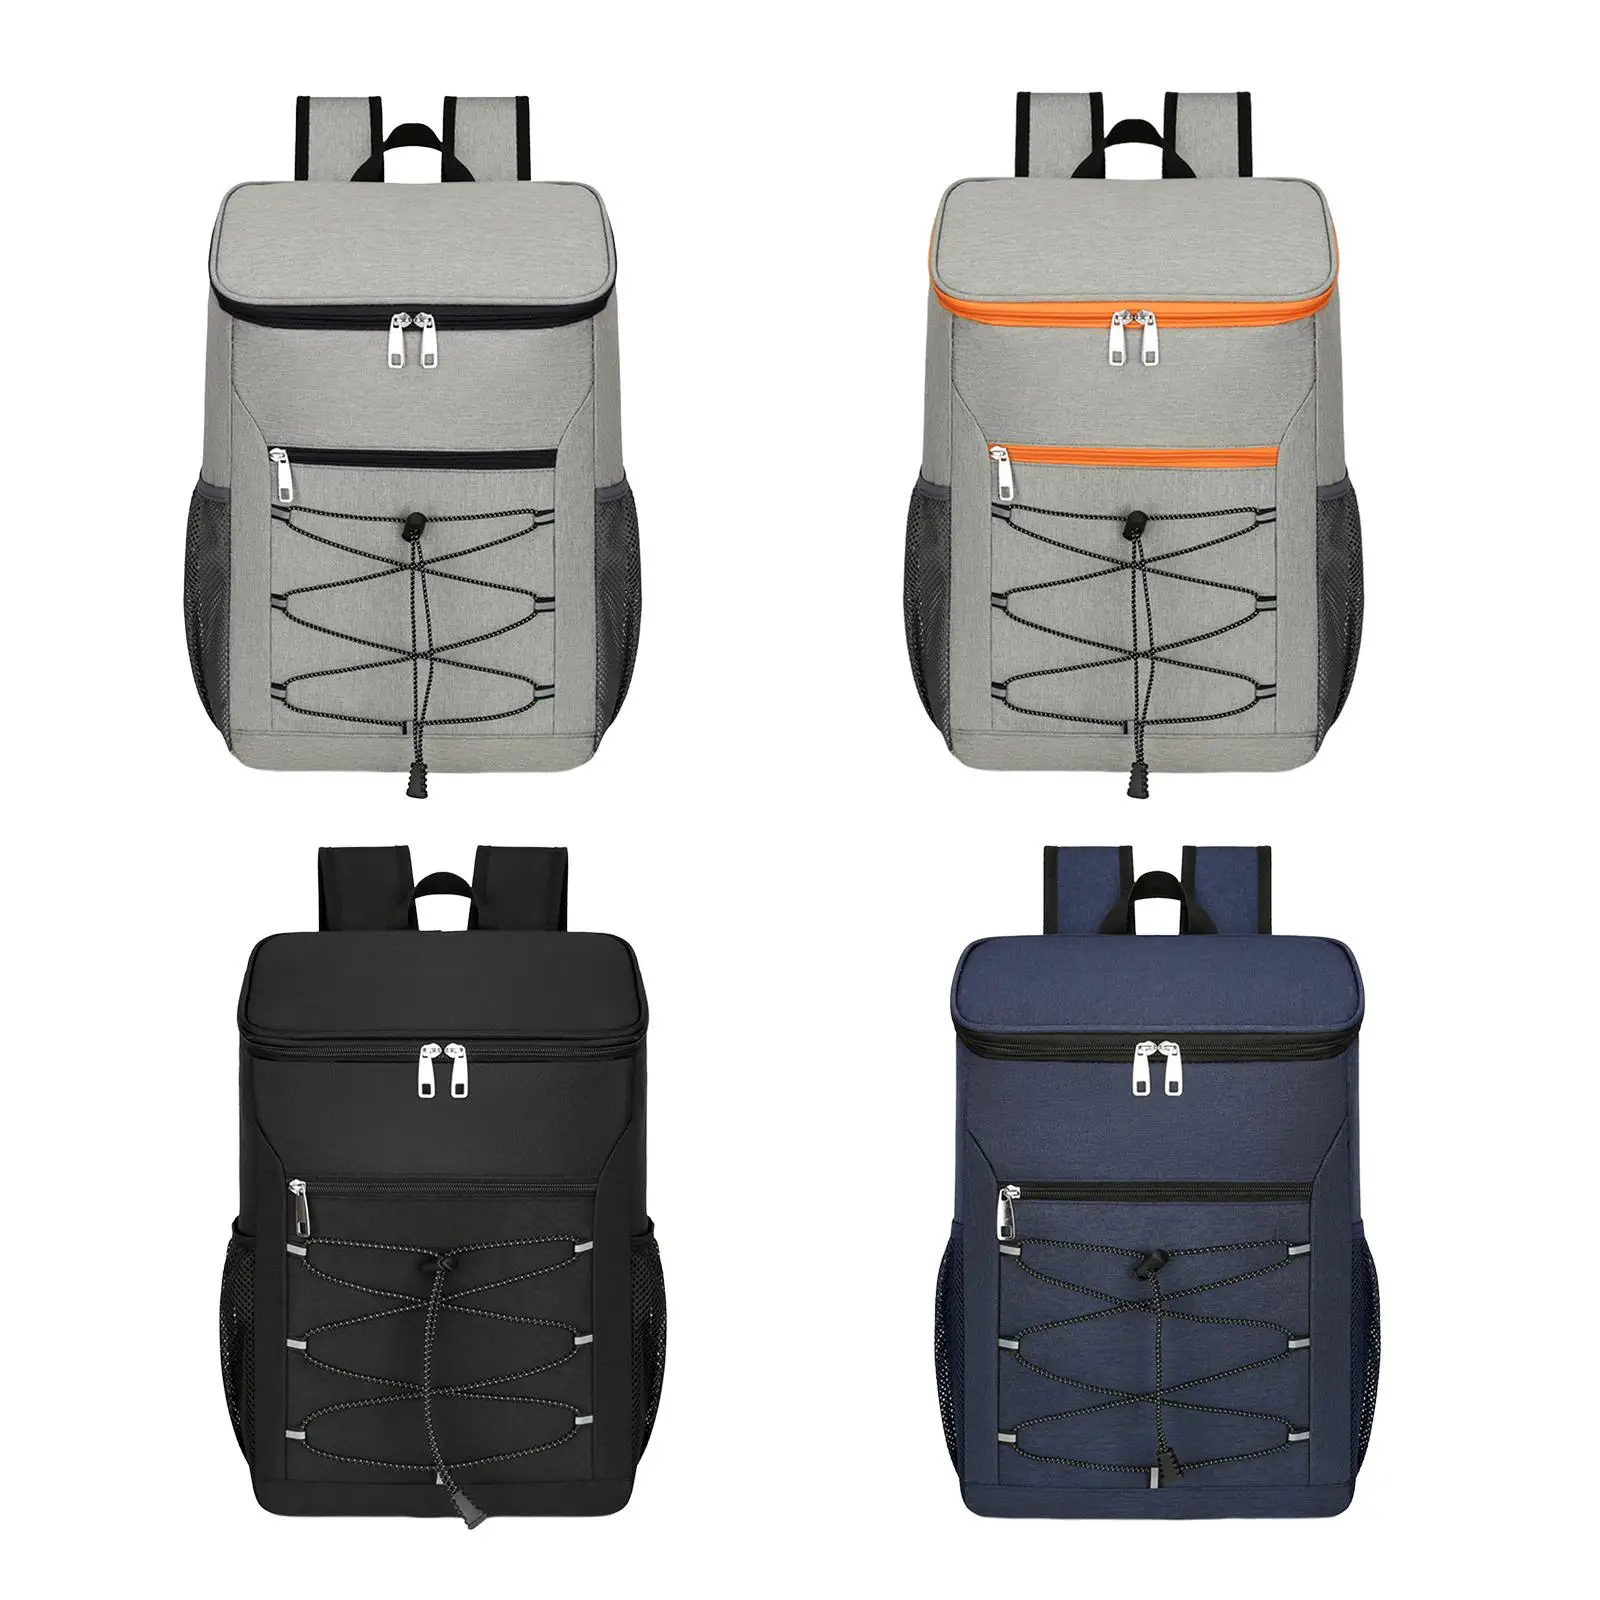 Insulated Cooler Backpack Insulated Cooler Bag Mesh Pocket Multifunctional Leakproof Lunch Backpack Beer Bag for Fishing Picnic